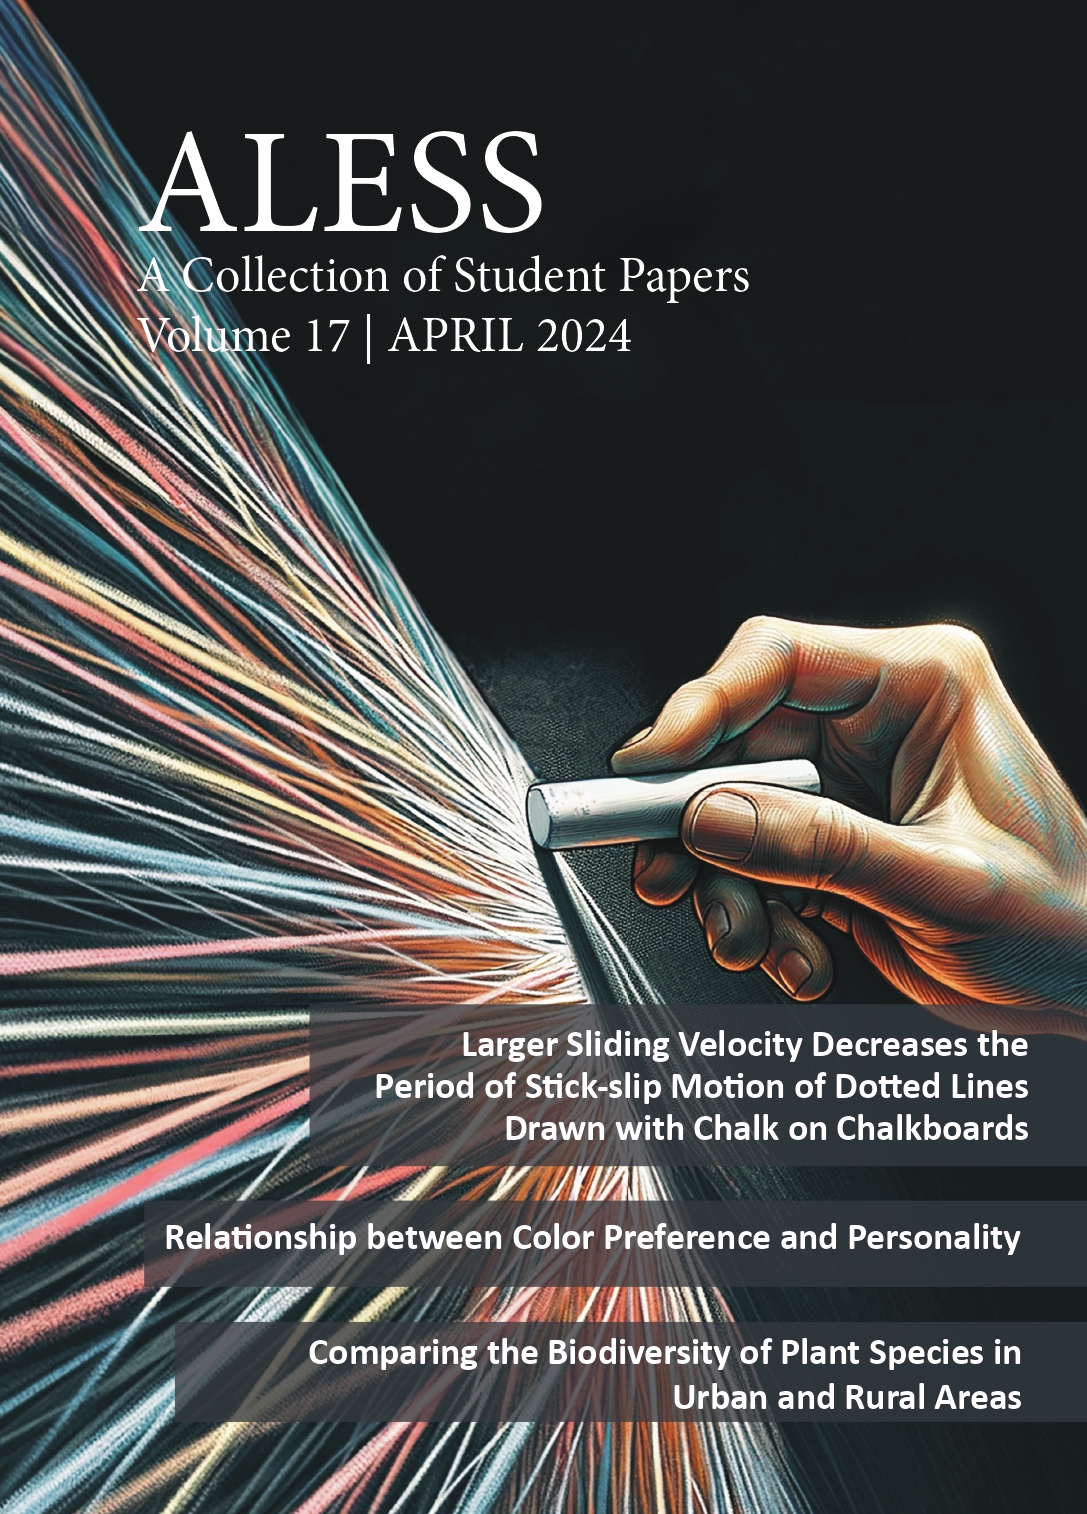 「ALESS: A Collection of Student Papers」の表紙